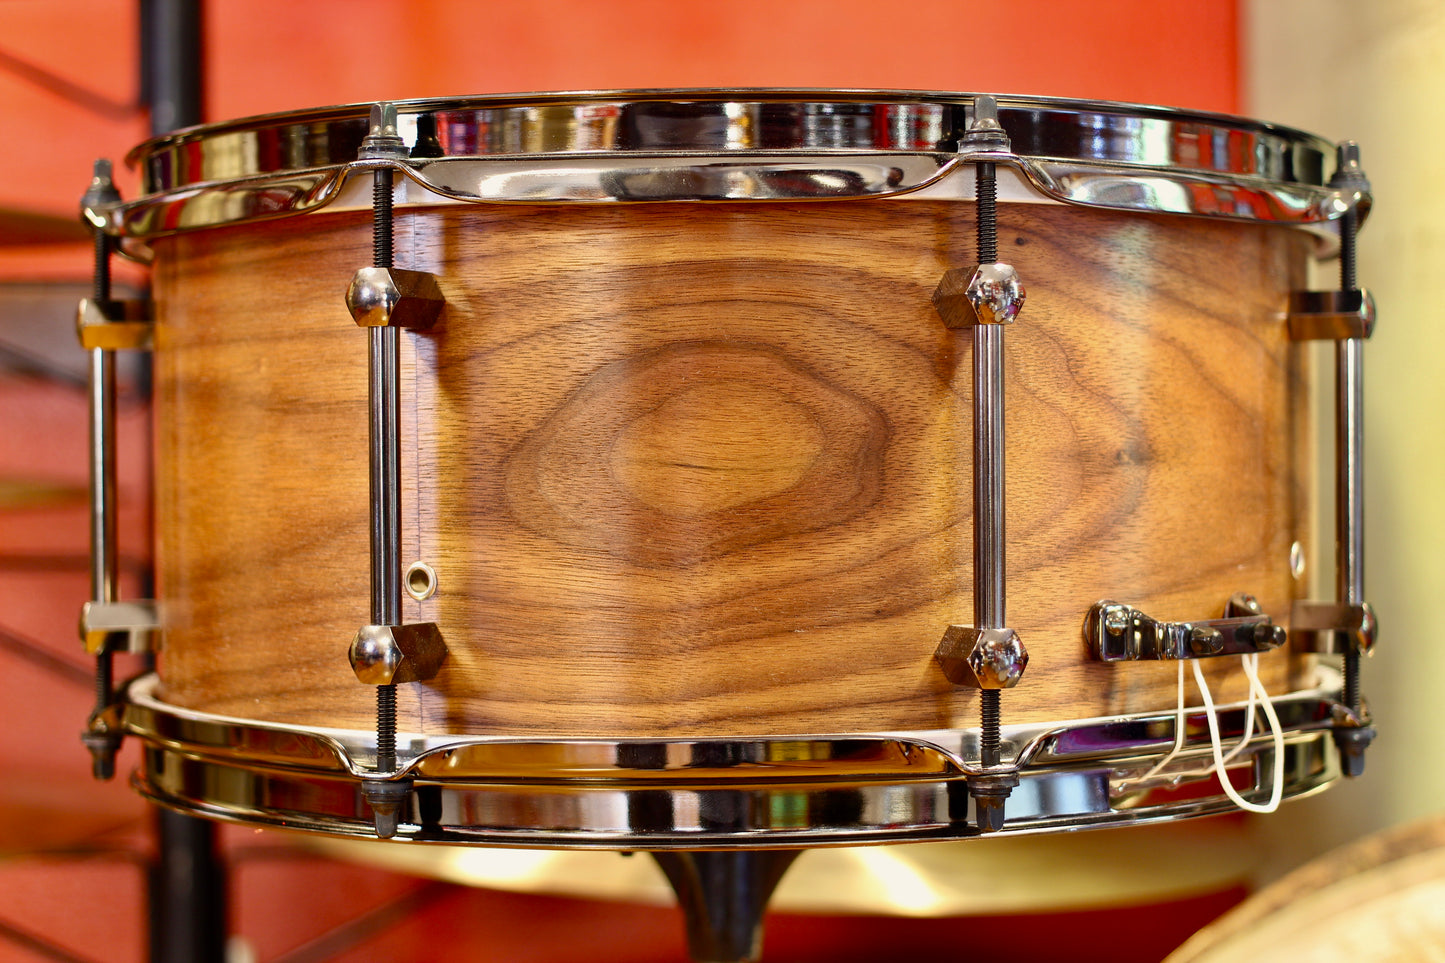 Noble & Cooley Walnut Series Snare Drum 6.5"x14"